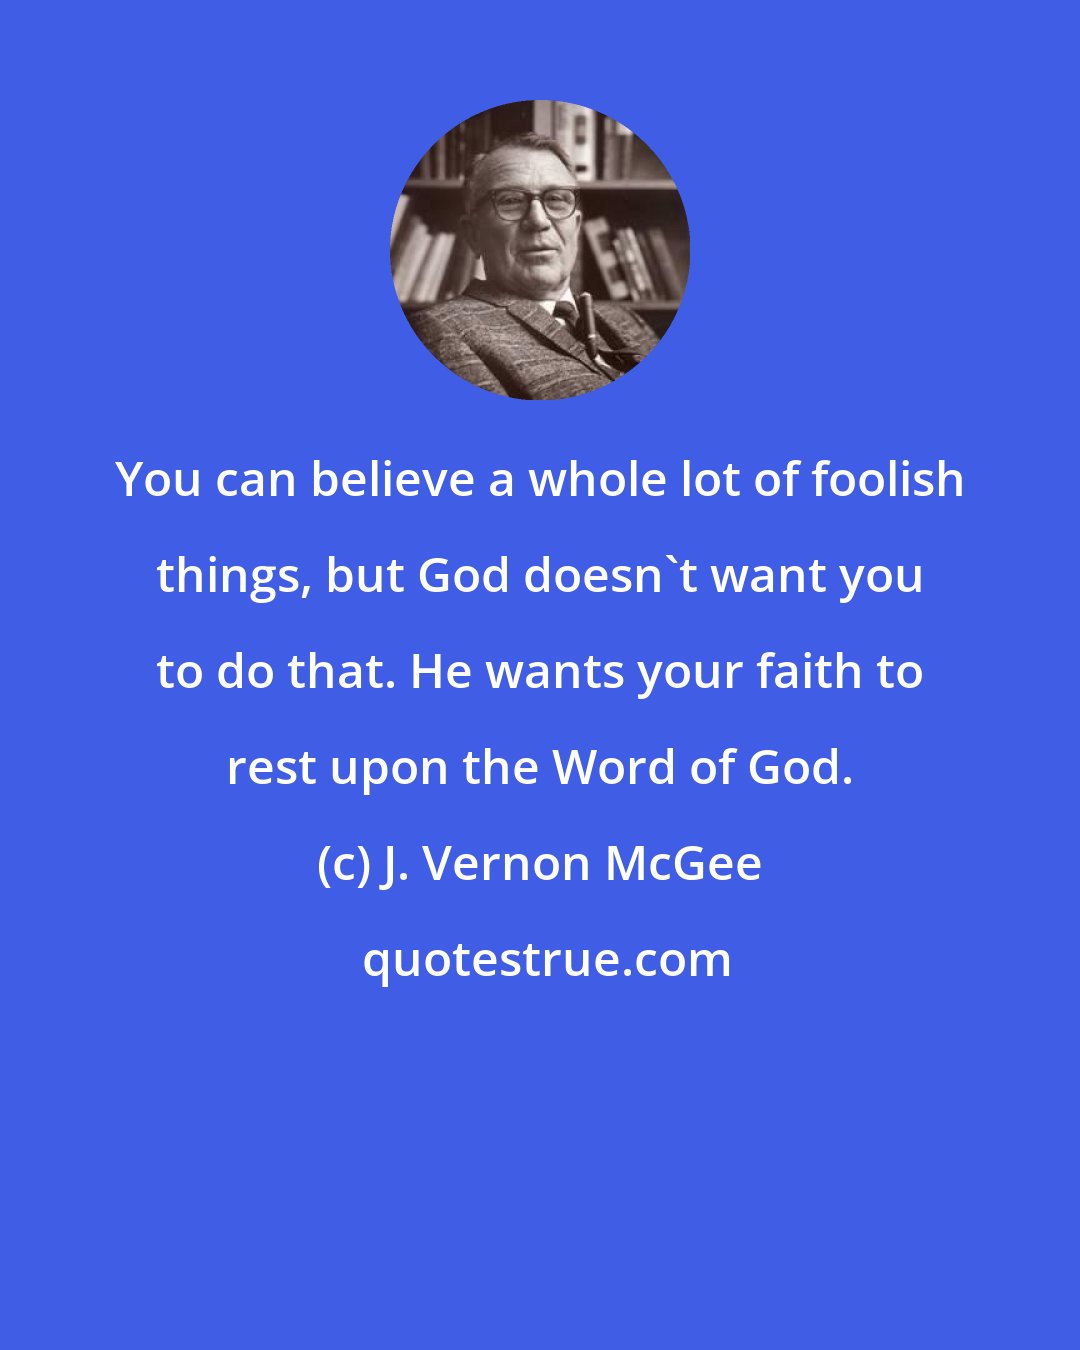 J. Vernon McGee: You can believe a whole lot of foolish things, but God doesn't want you to do that. He wants your faith to rest upon the Word of God.